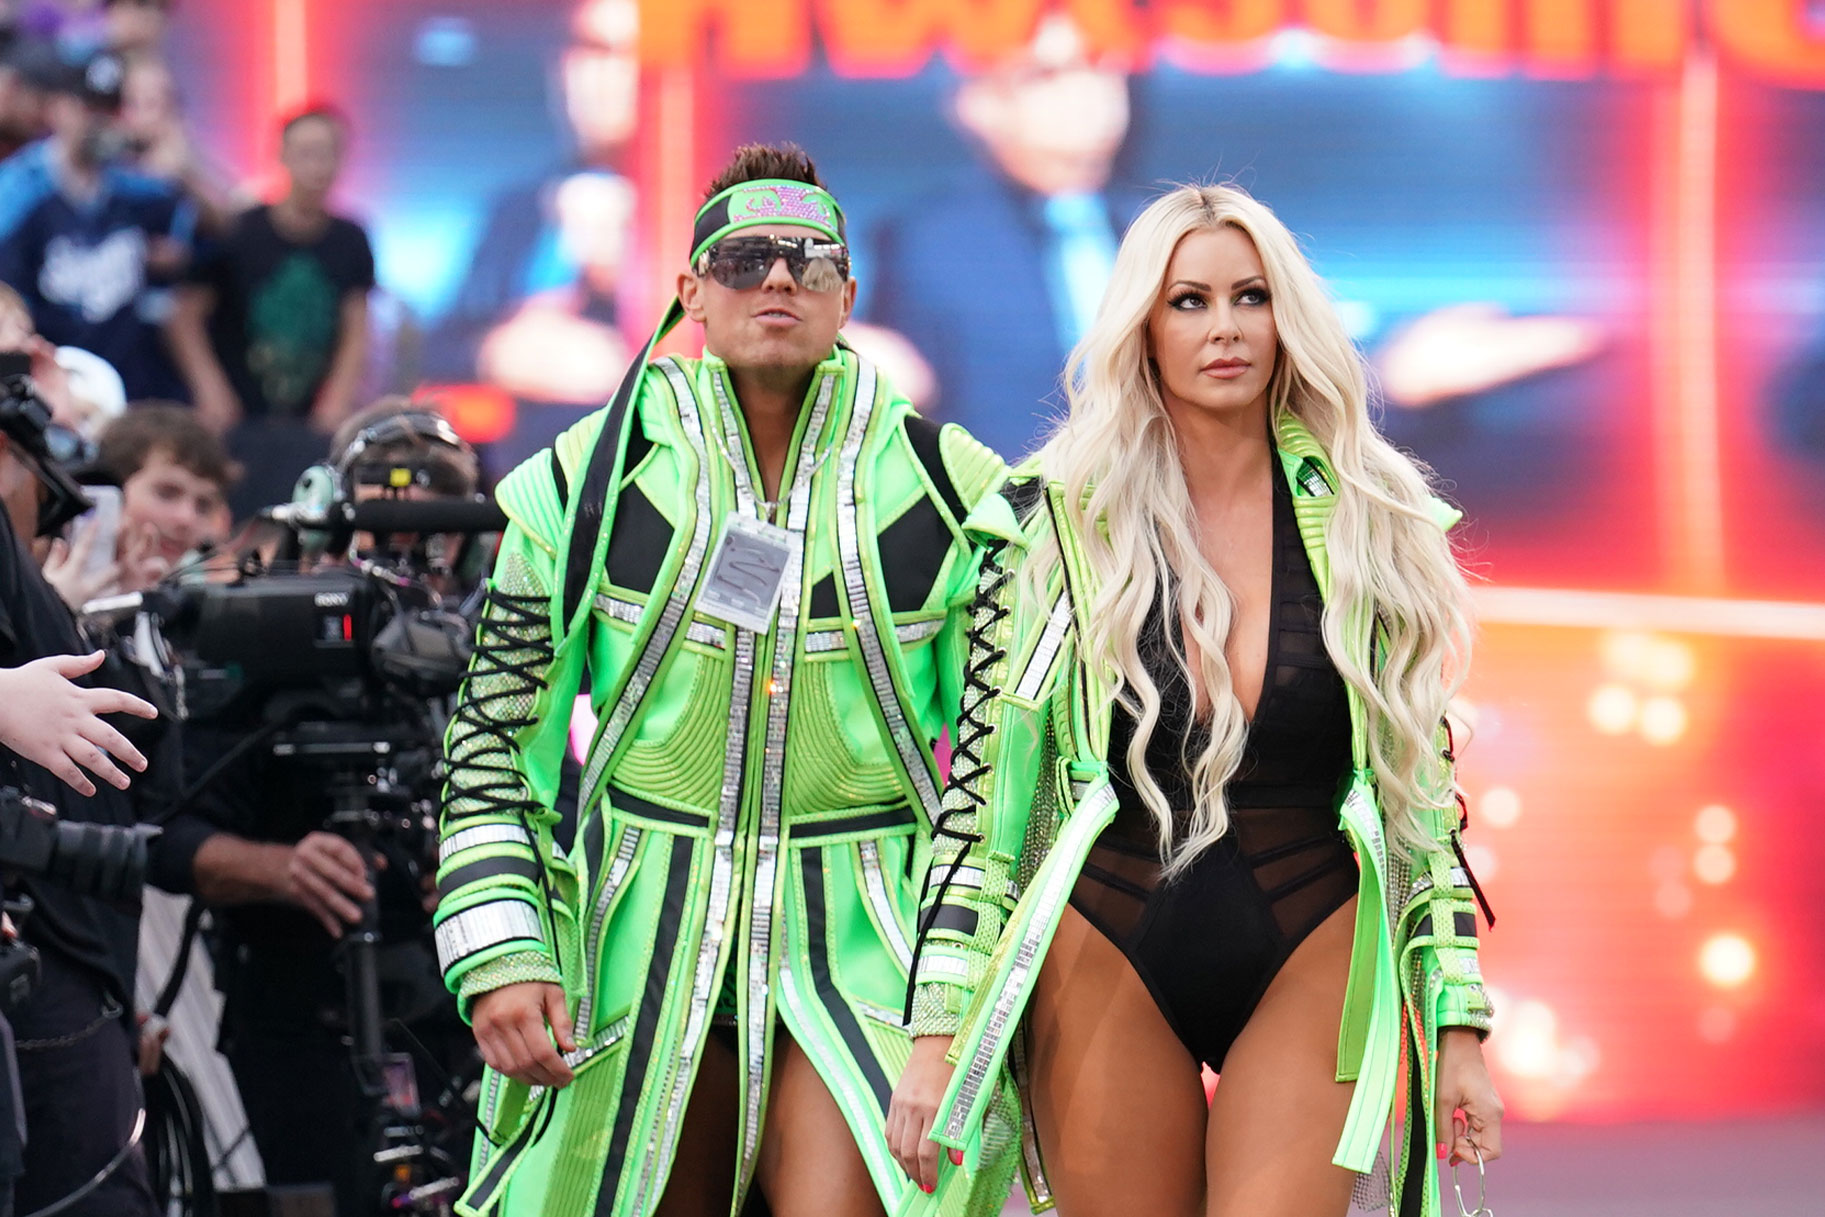 Miz and Maryse walking to the stage